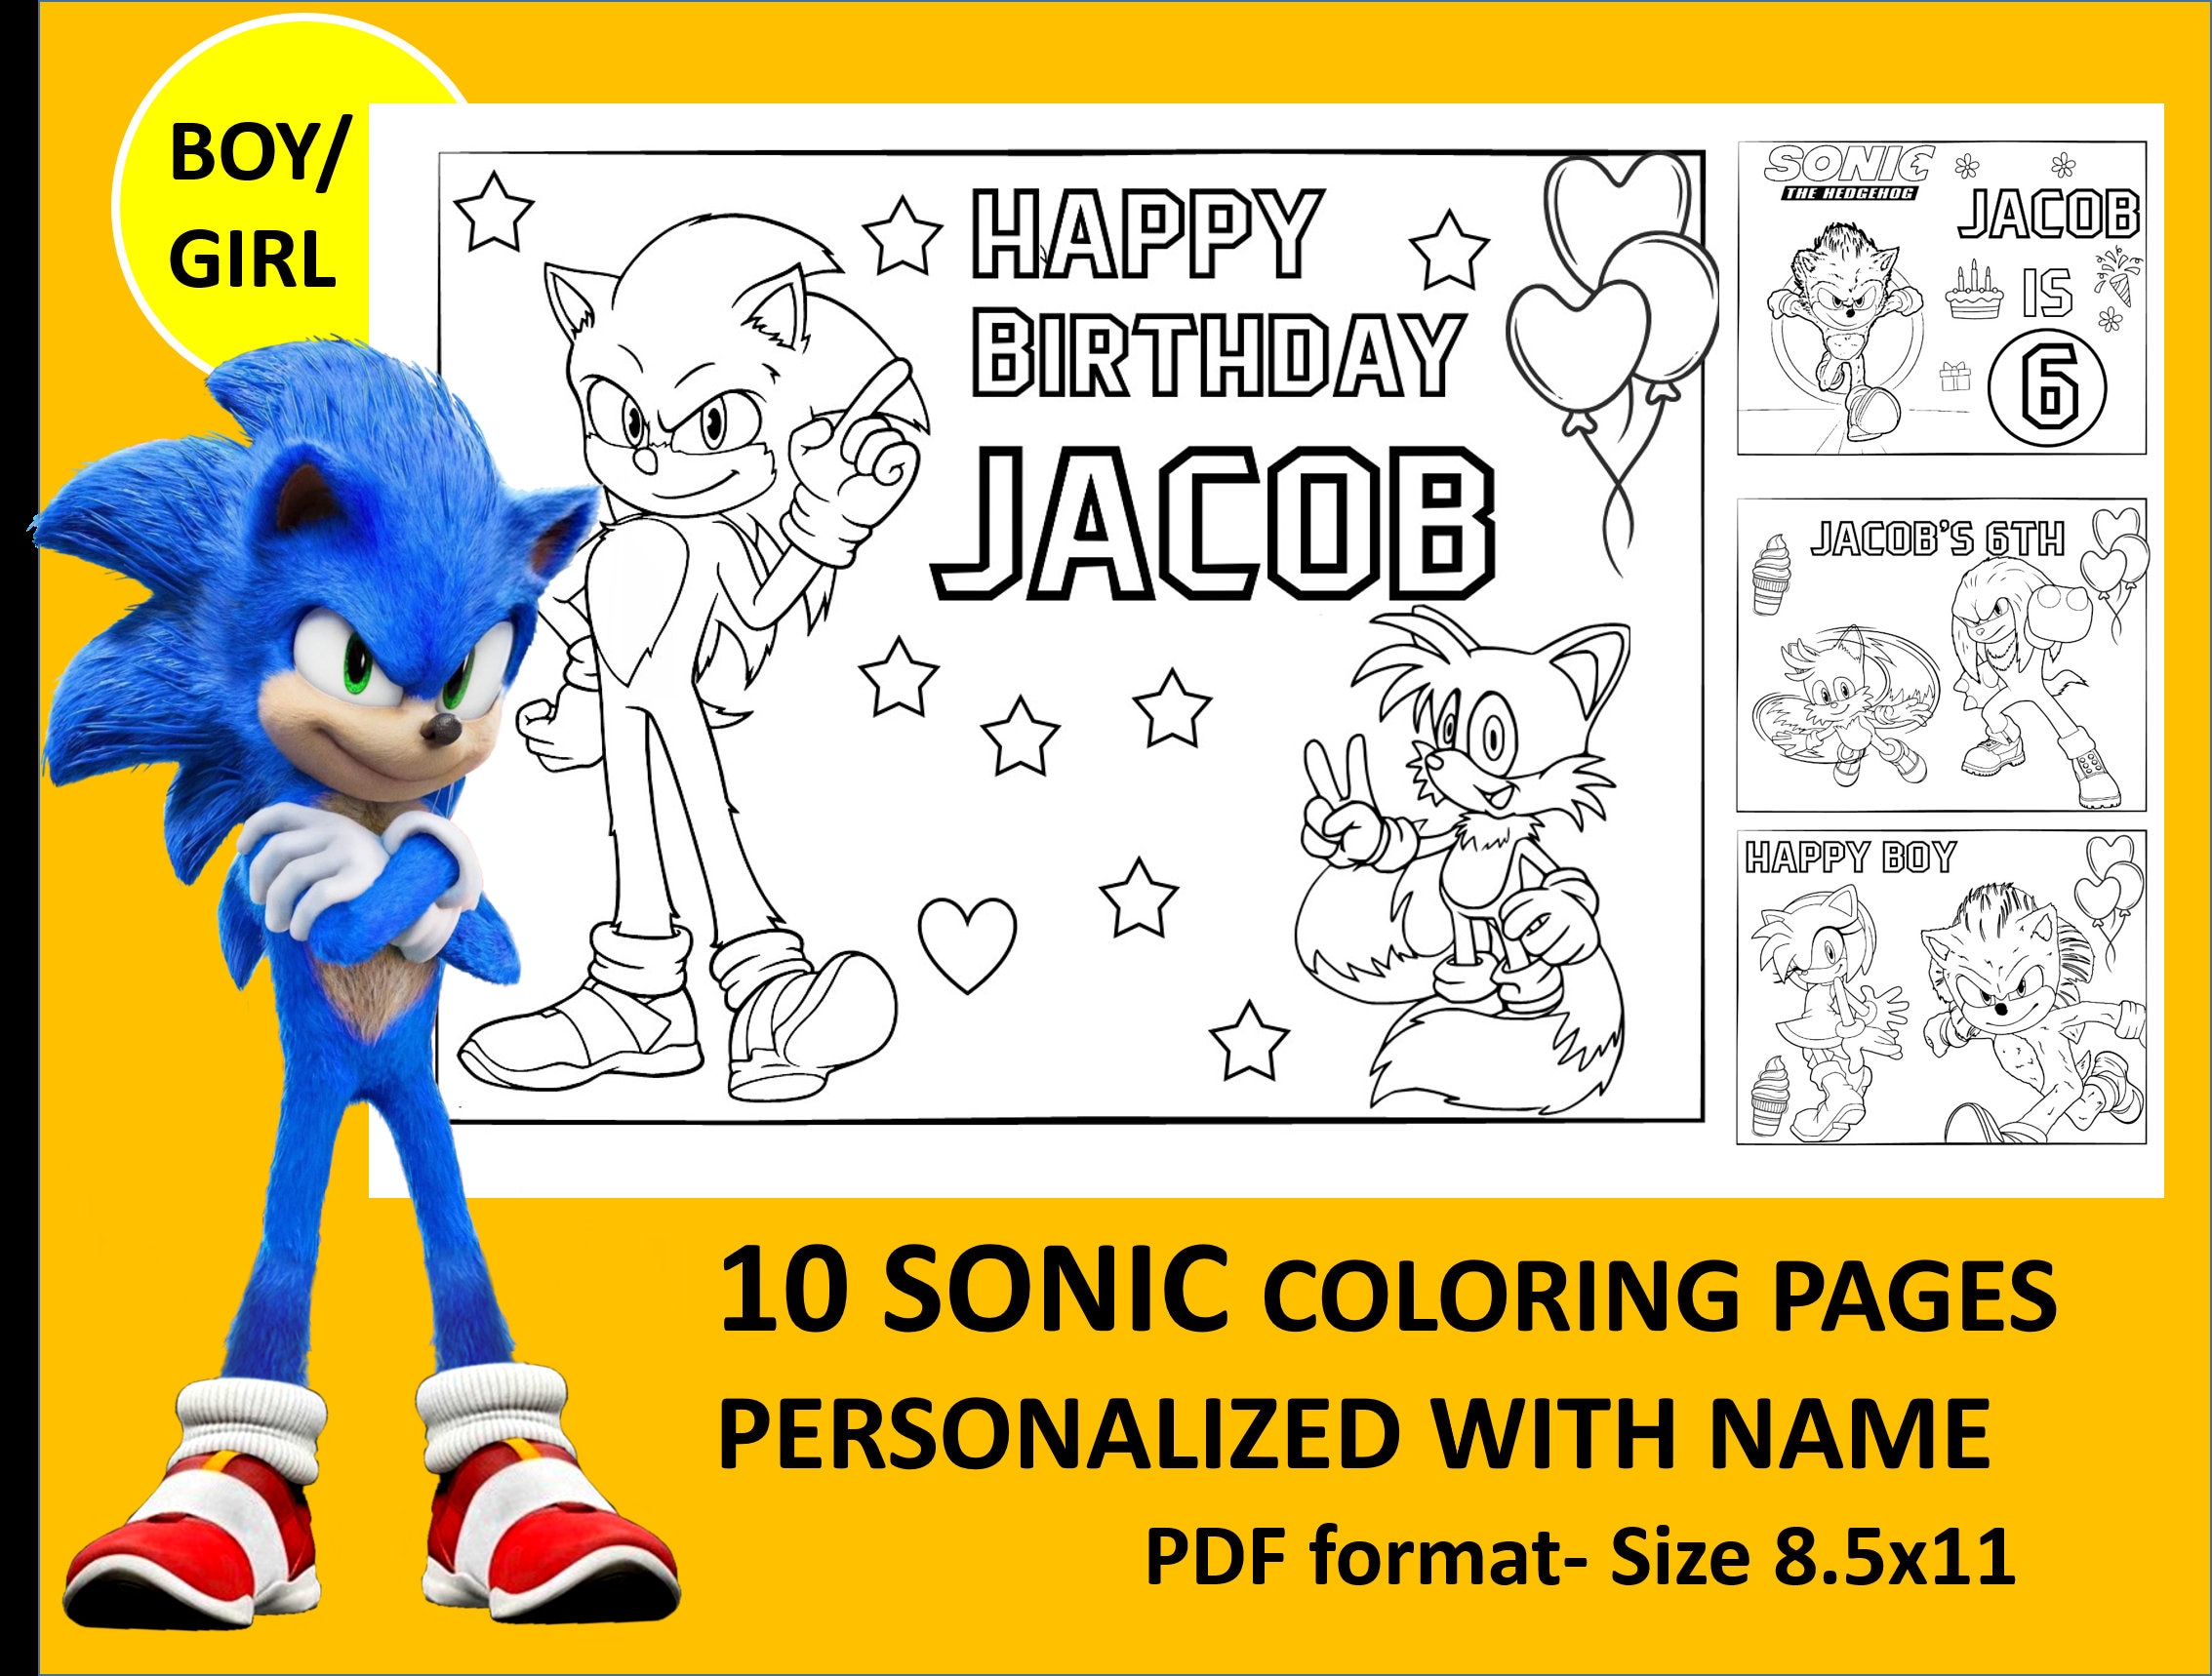 Printable sonic coloring page for birthday personalized with name pdf format